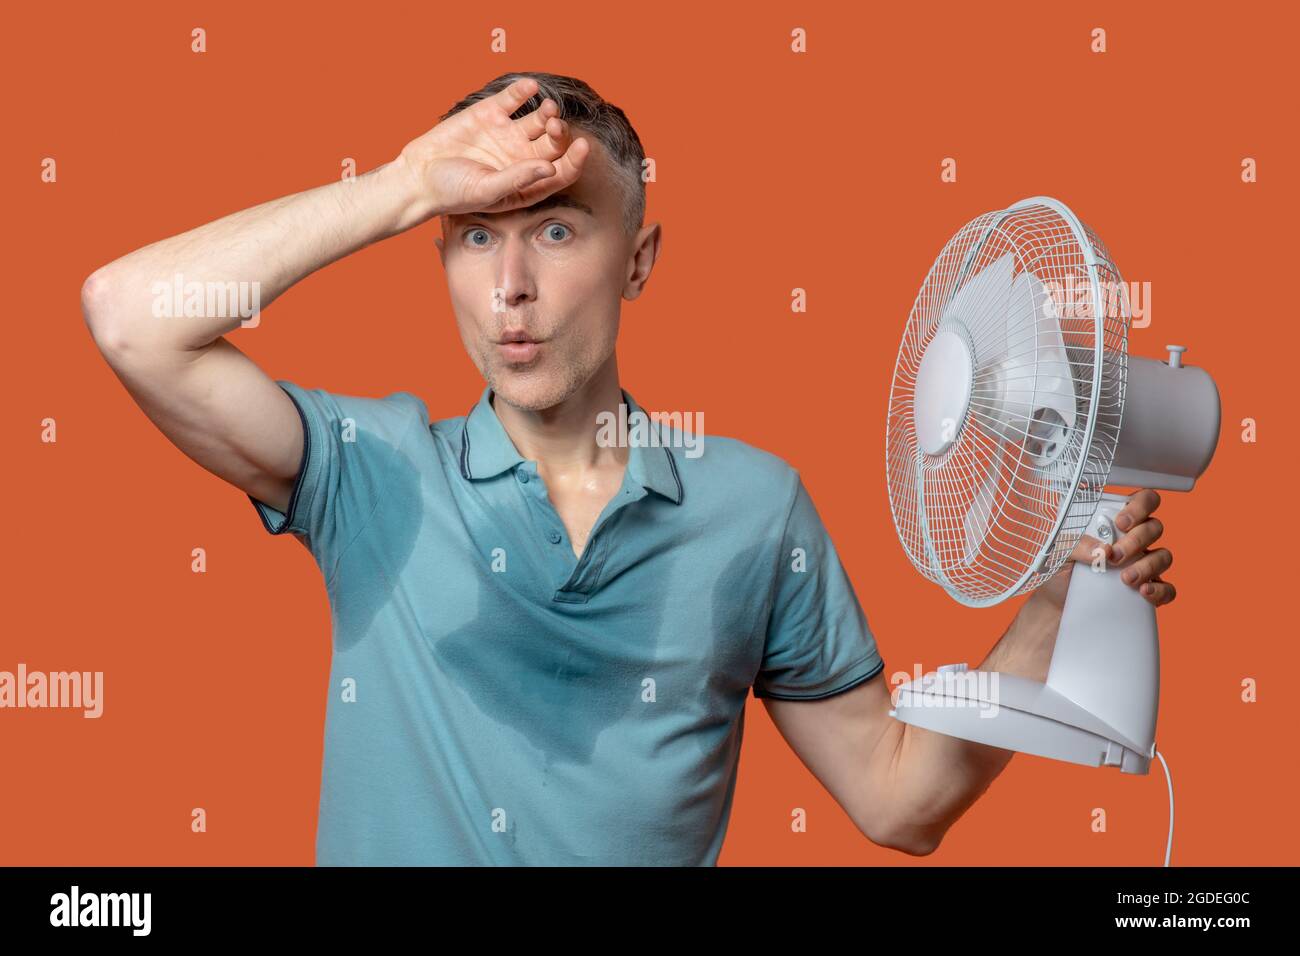 Unhappy man in wet tshirt touching forehead Stock Photo